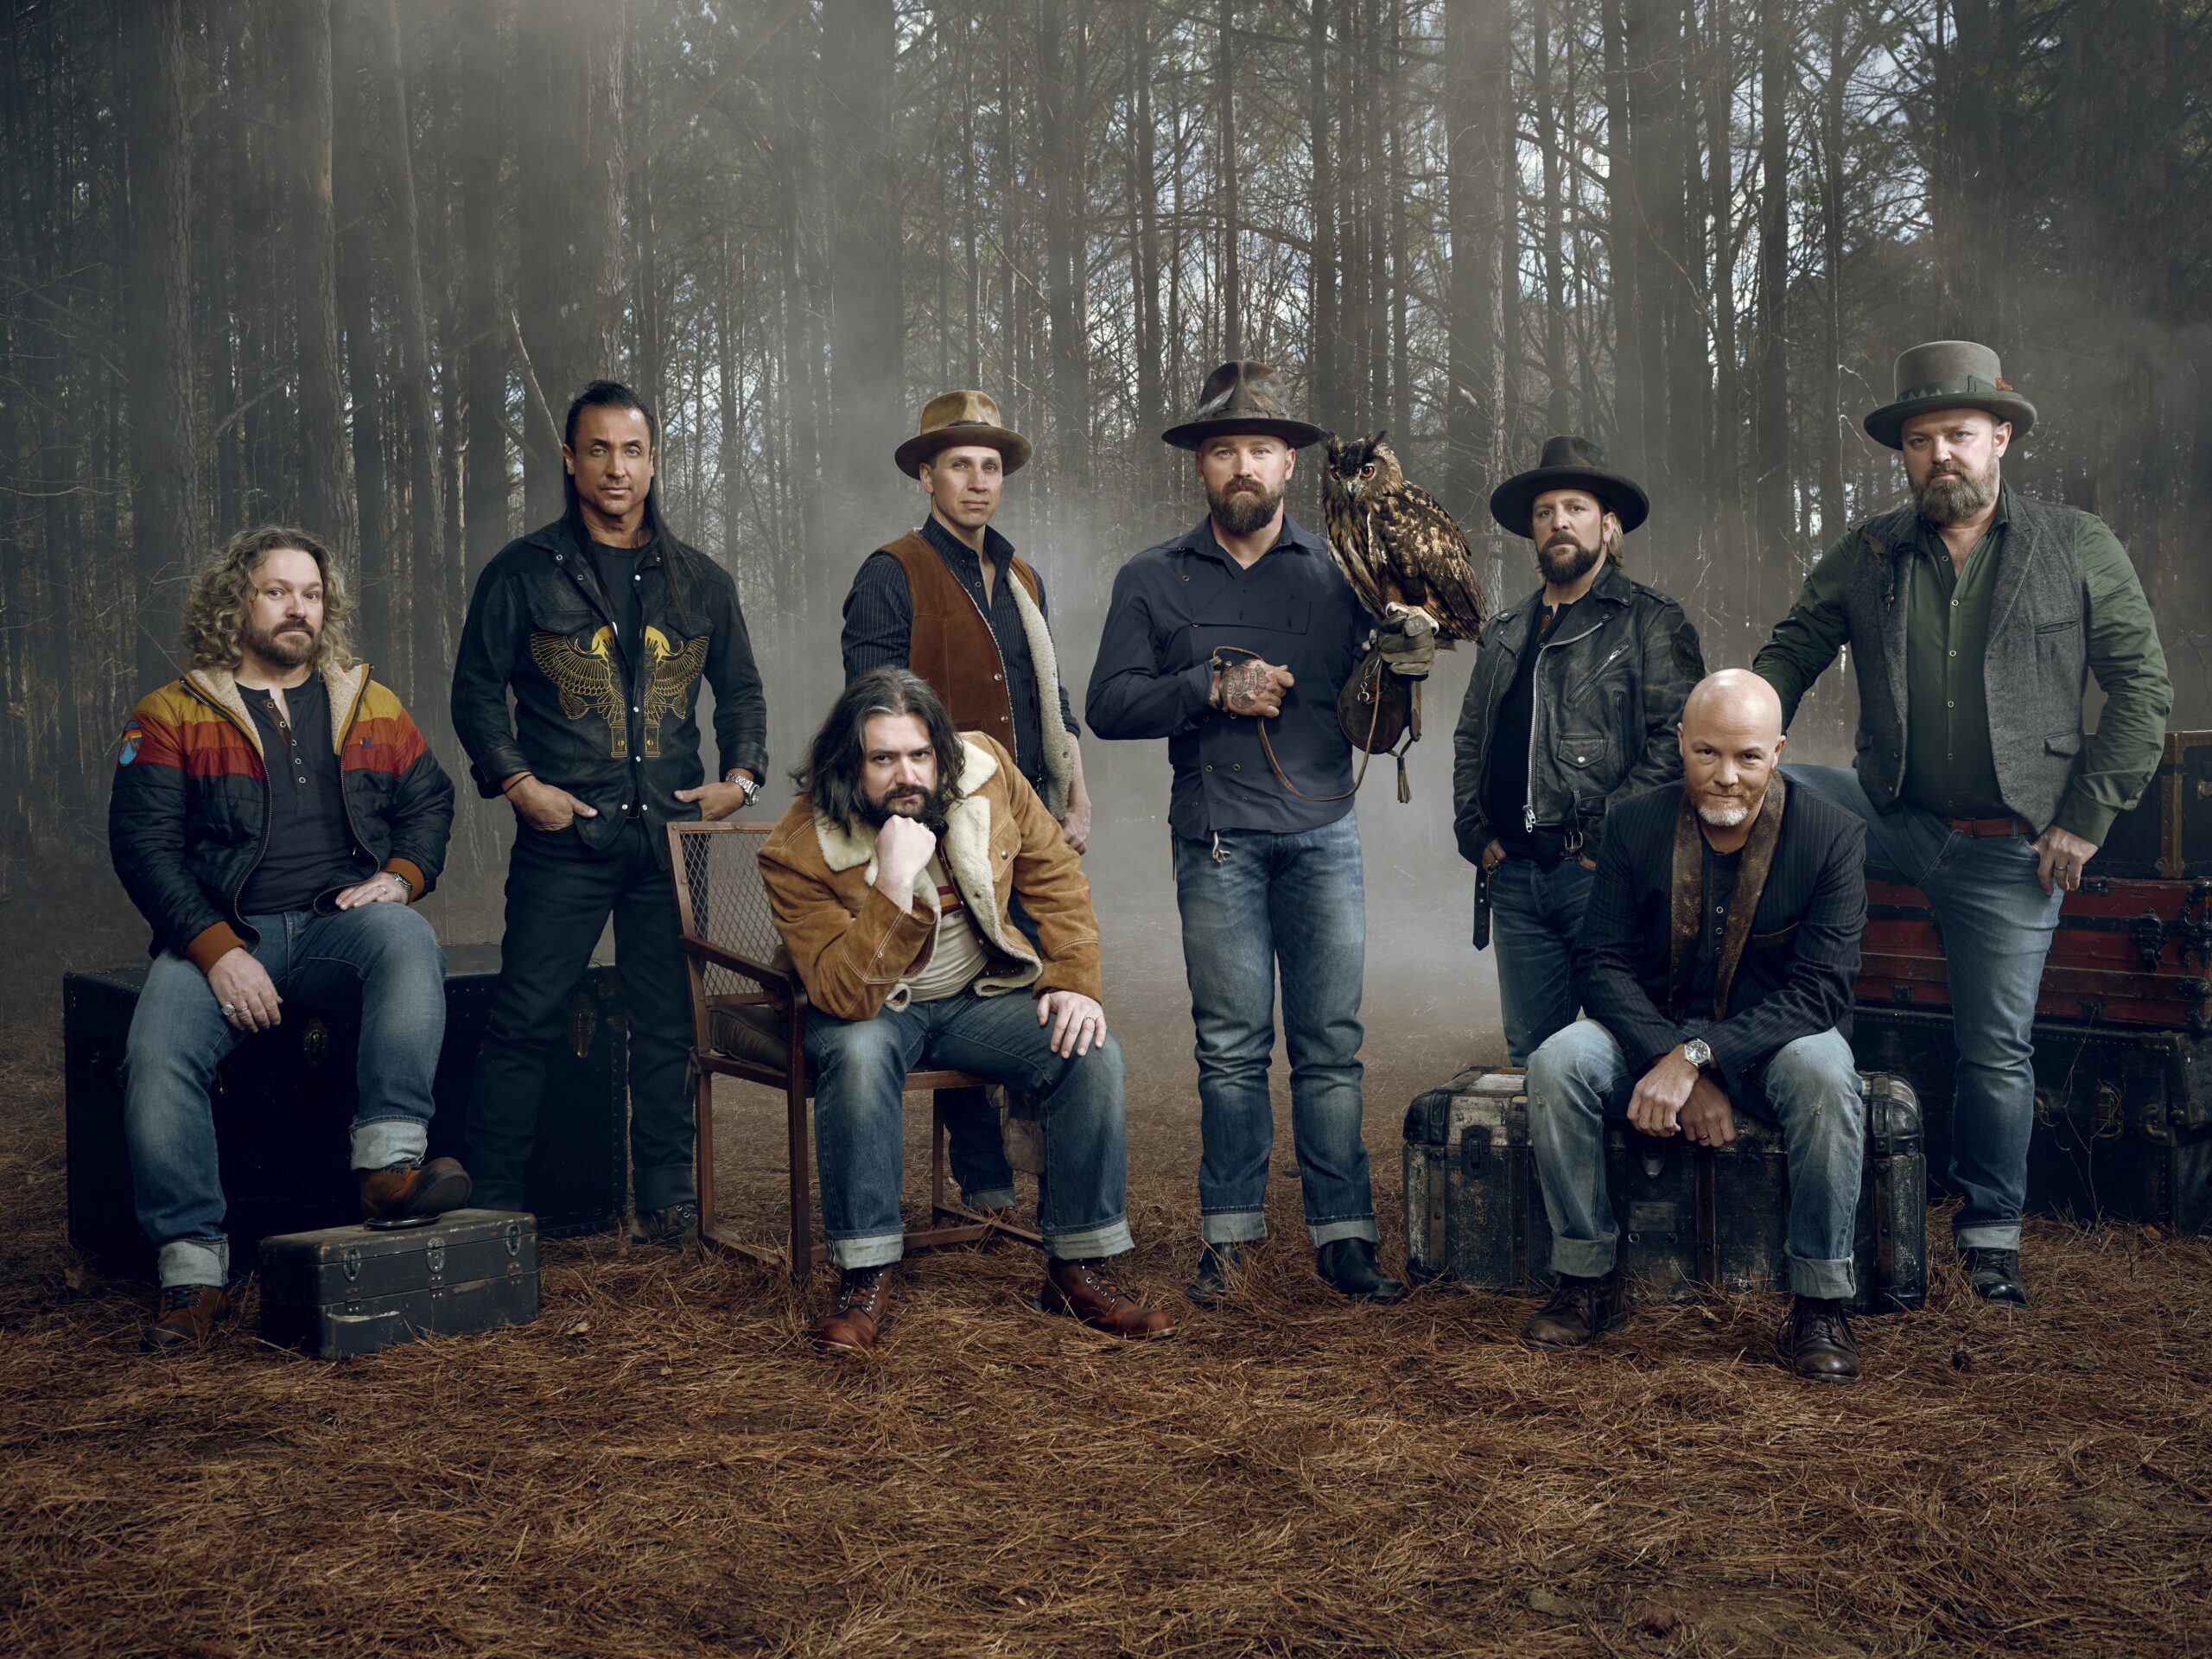 Last Chance to Win Tickets to See Zac Brown Band!